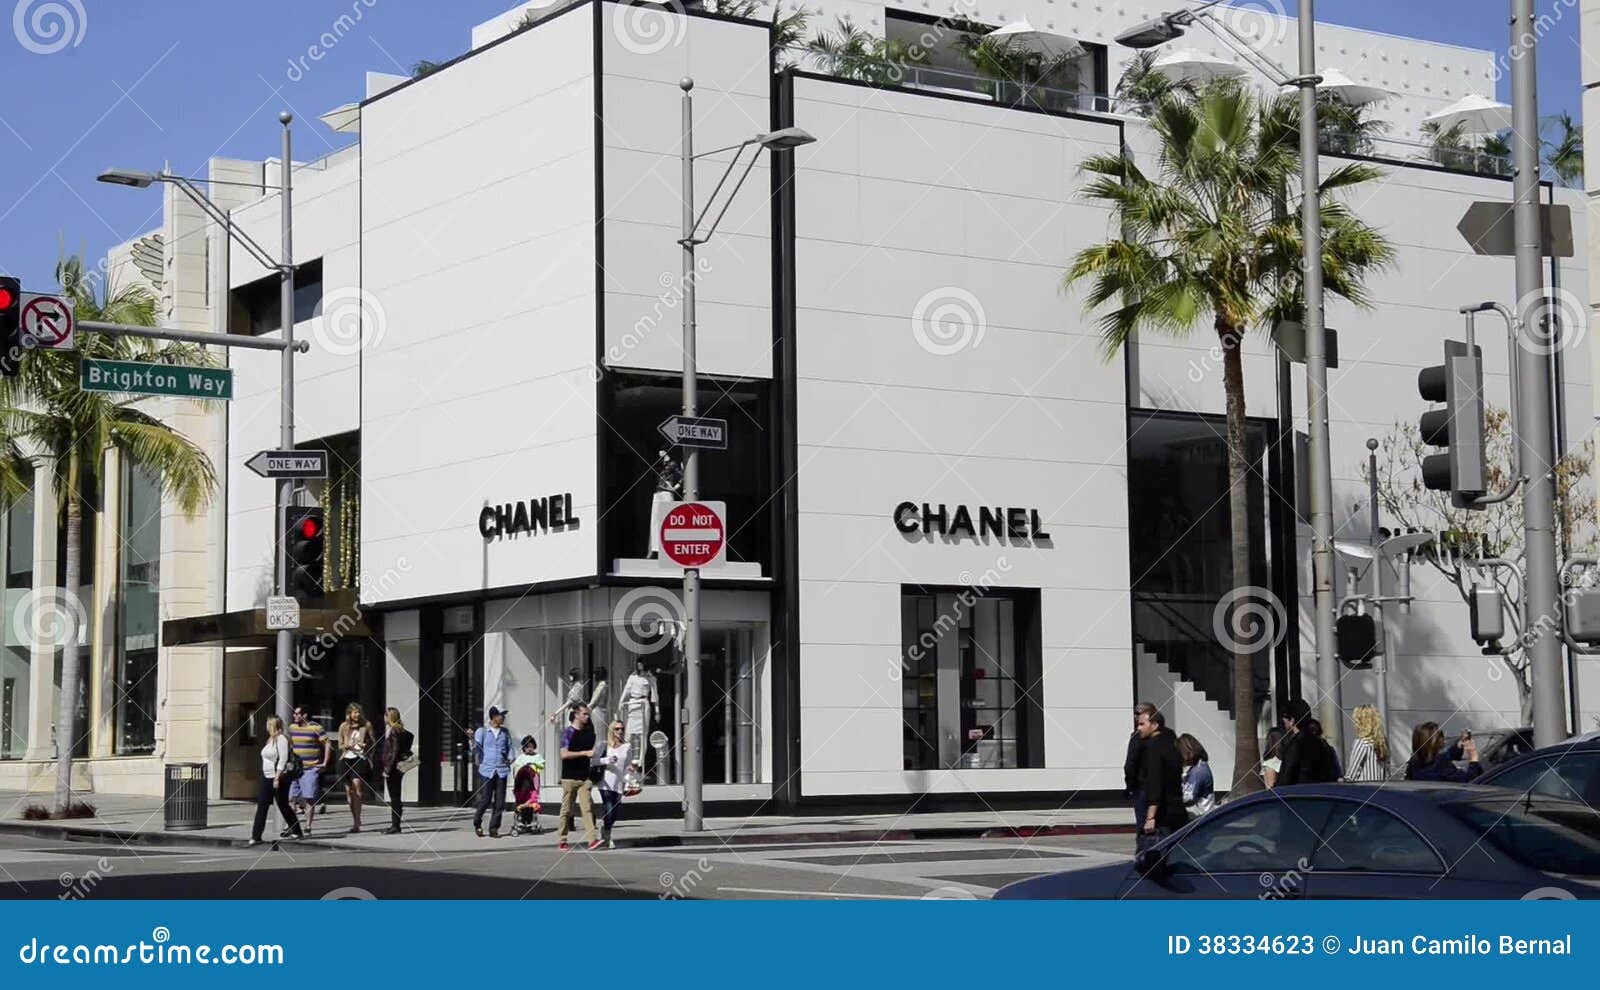 Prada and Gucci Stores in the Christmas Lights on Rodeo Drive during the  California December Quarantine Stock Video - Video of gown, figurine:  205849365